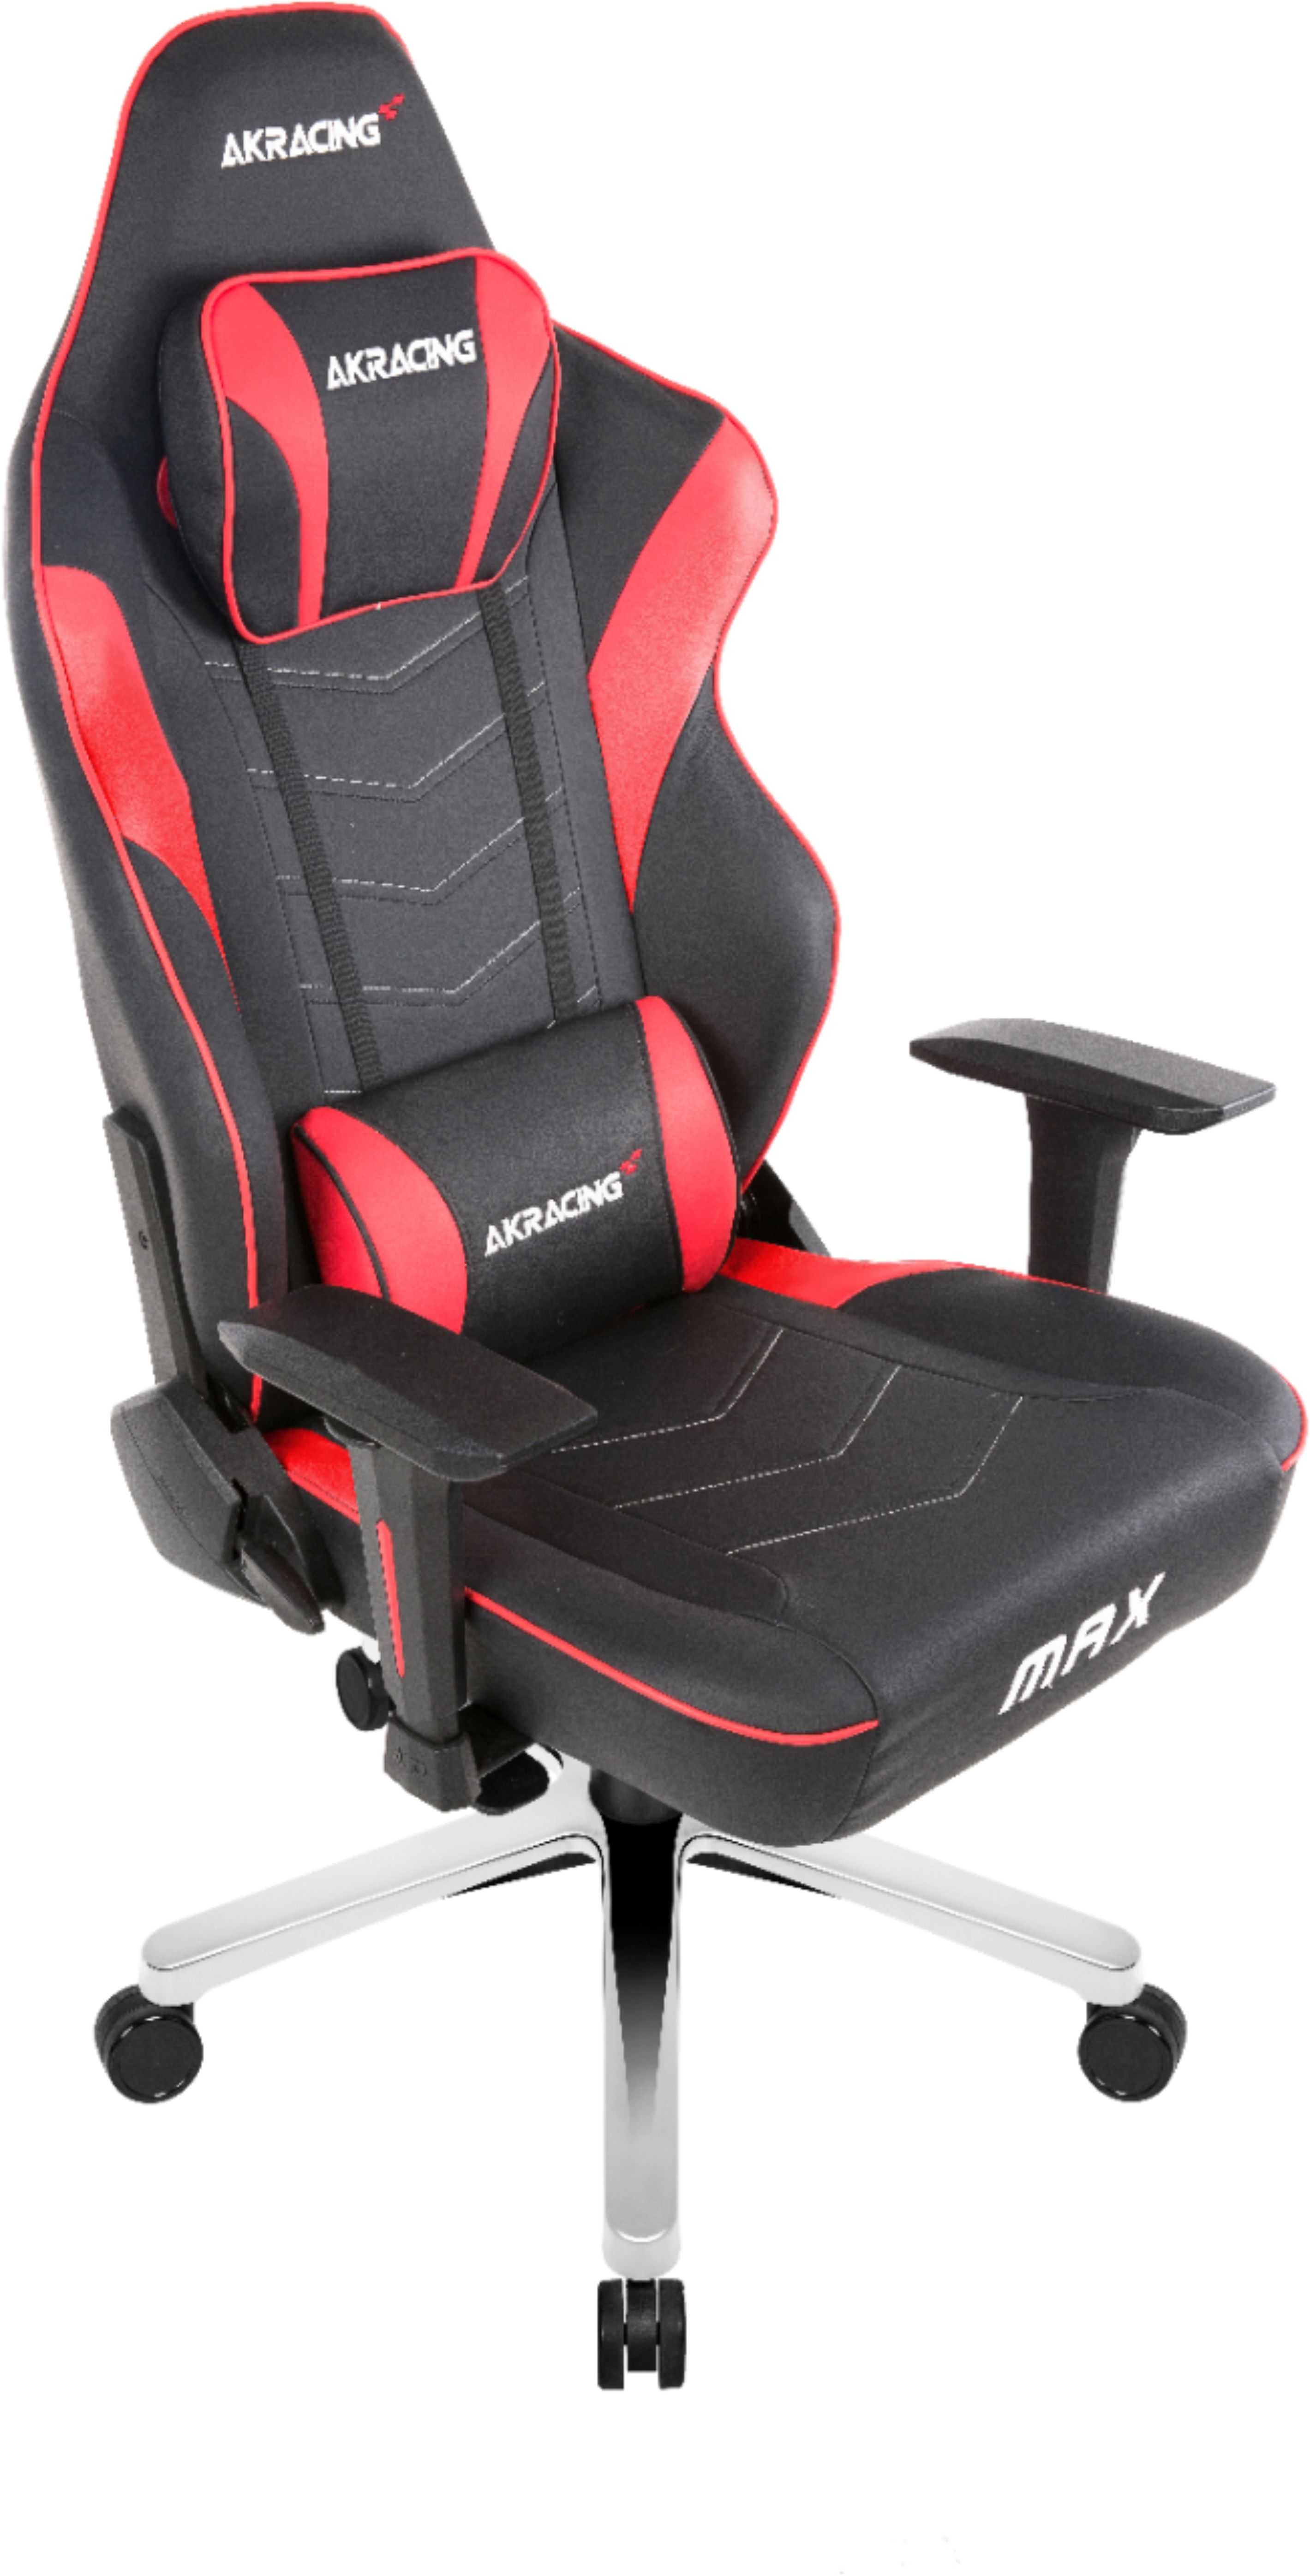 Angle View: AKRacing - Masters Series Max XXL Gaming Chair - Black/Red